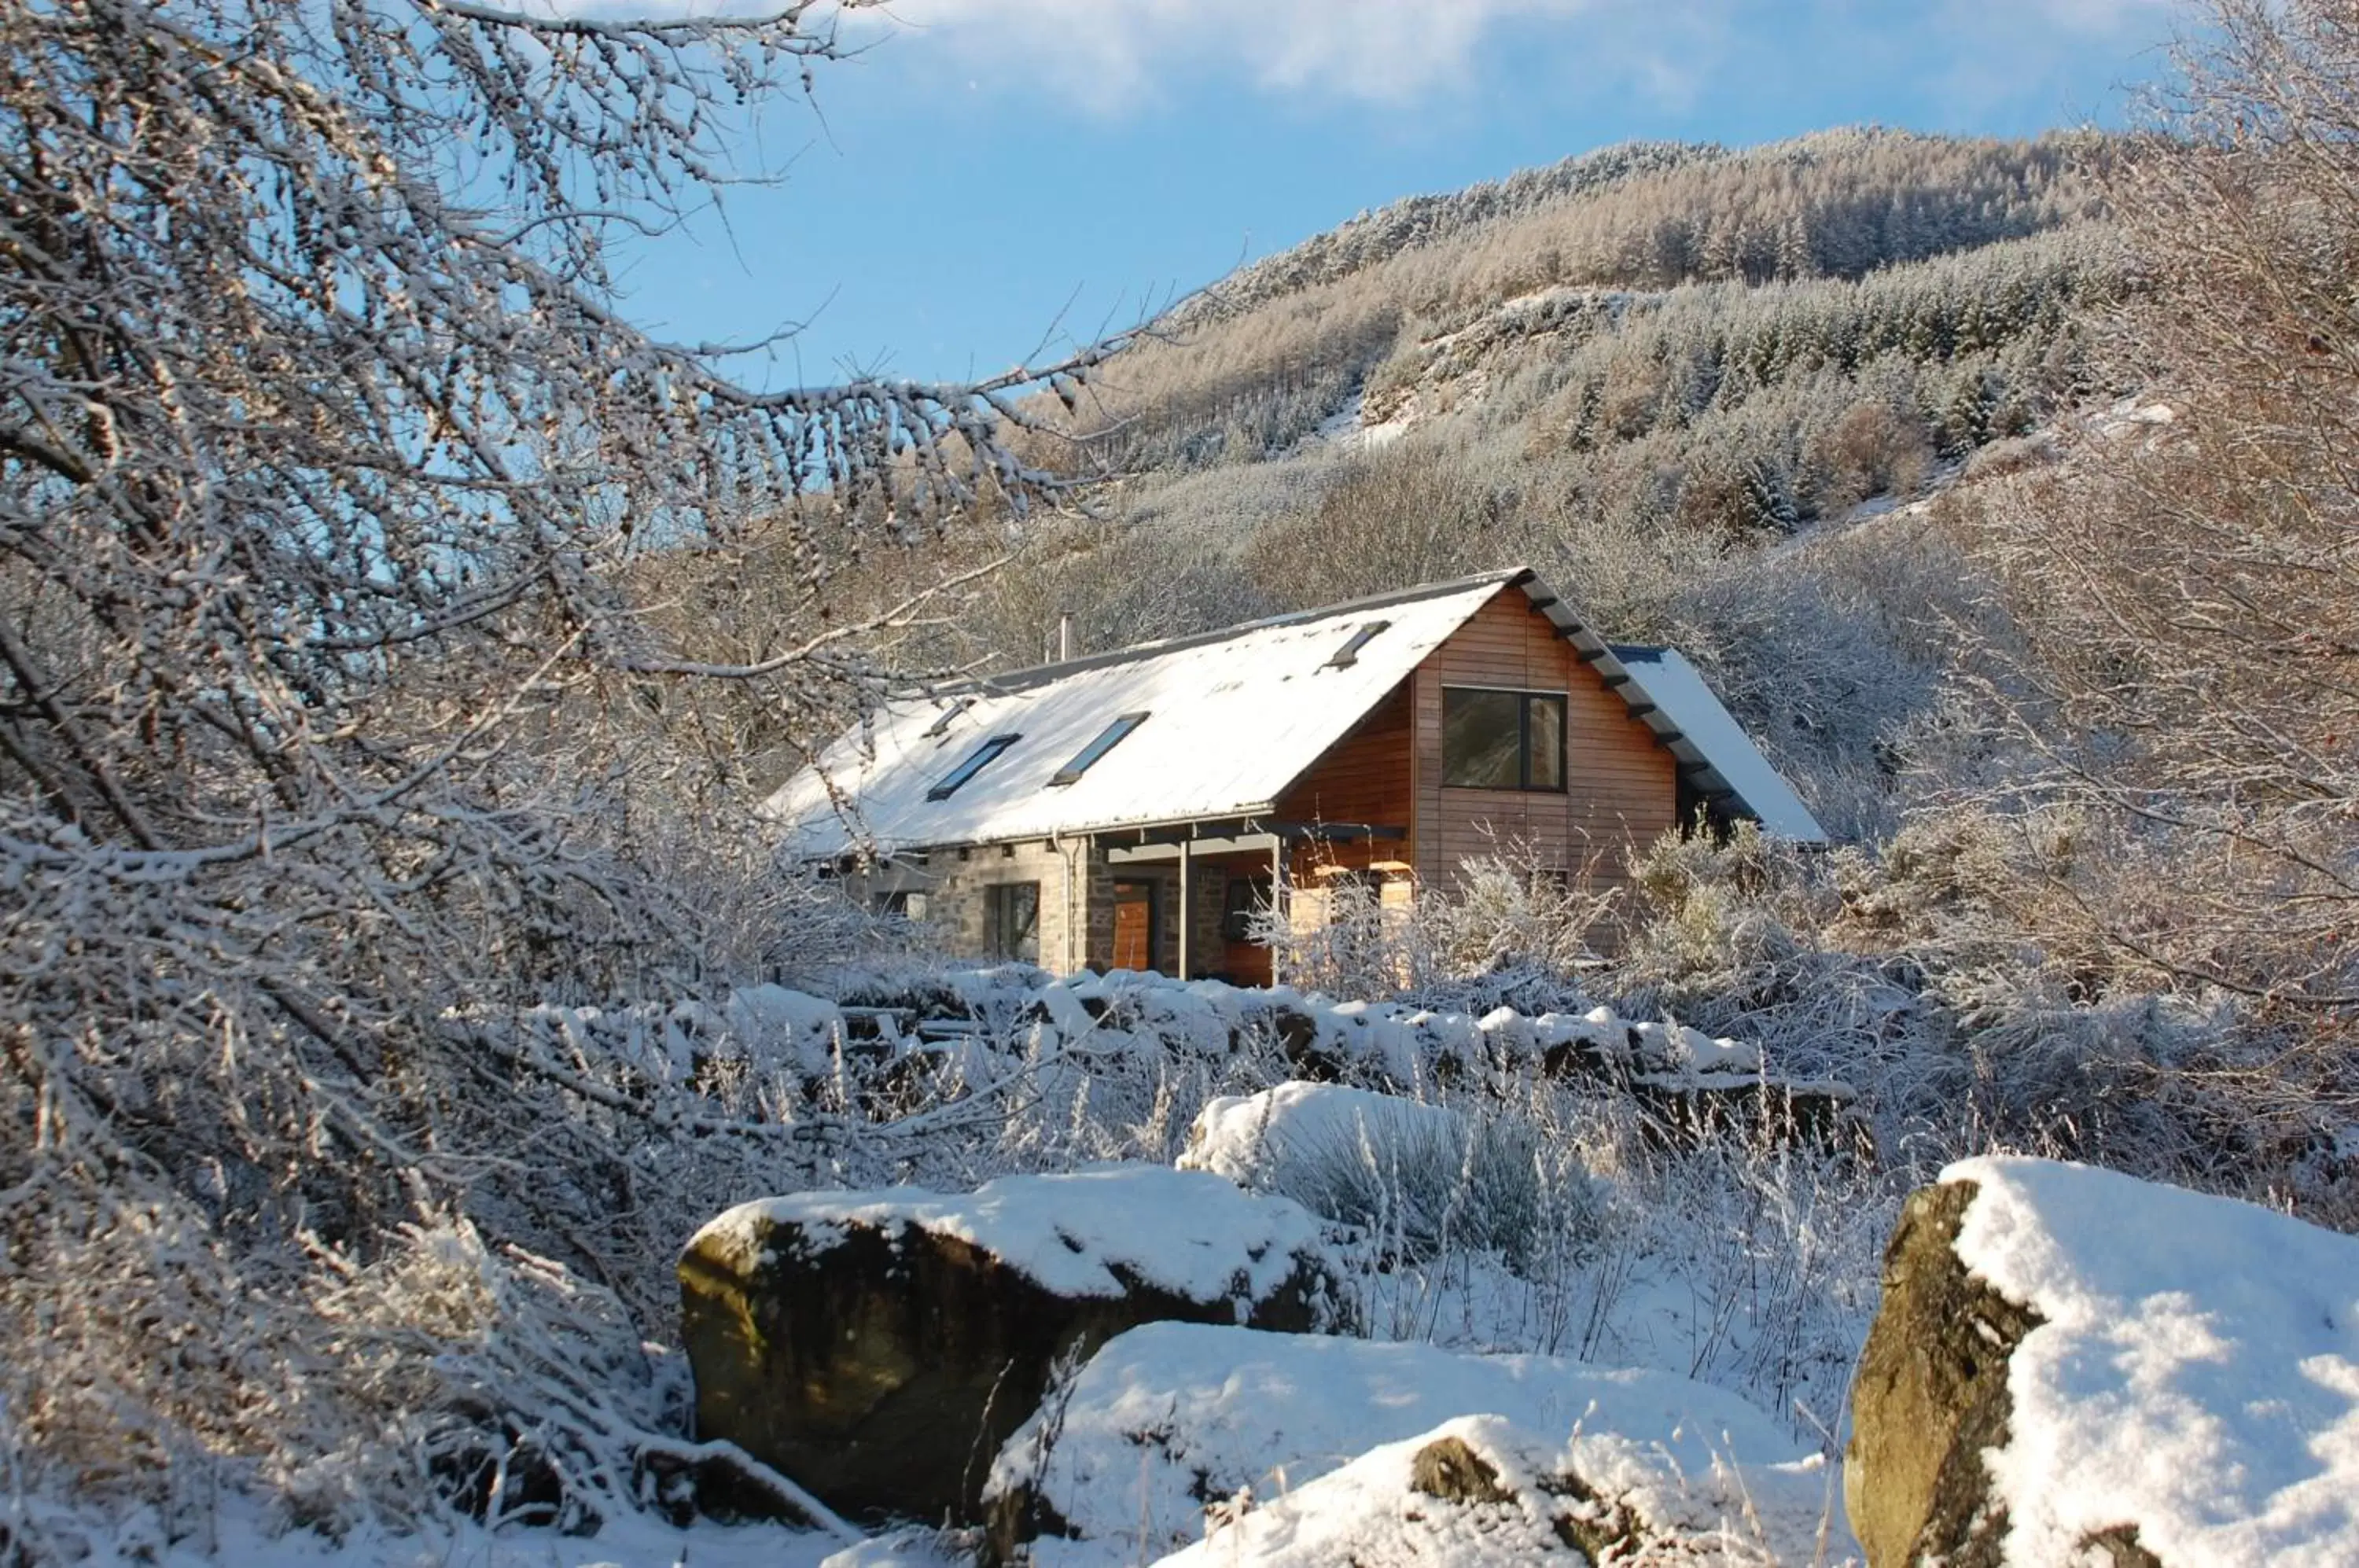 Property building, Winter in The Steading